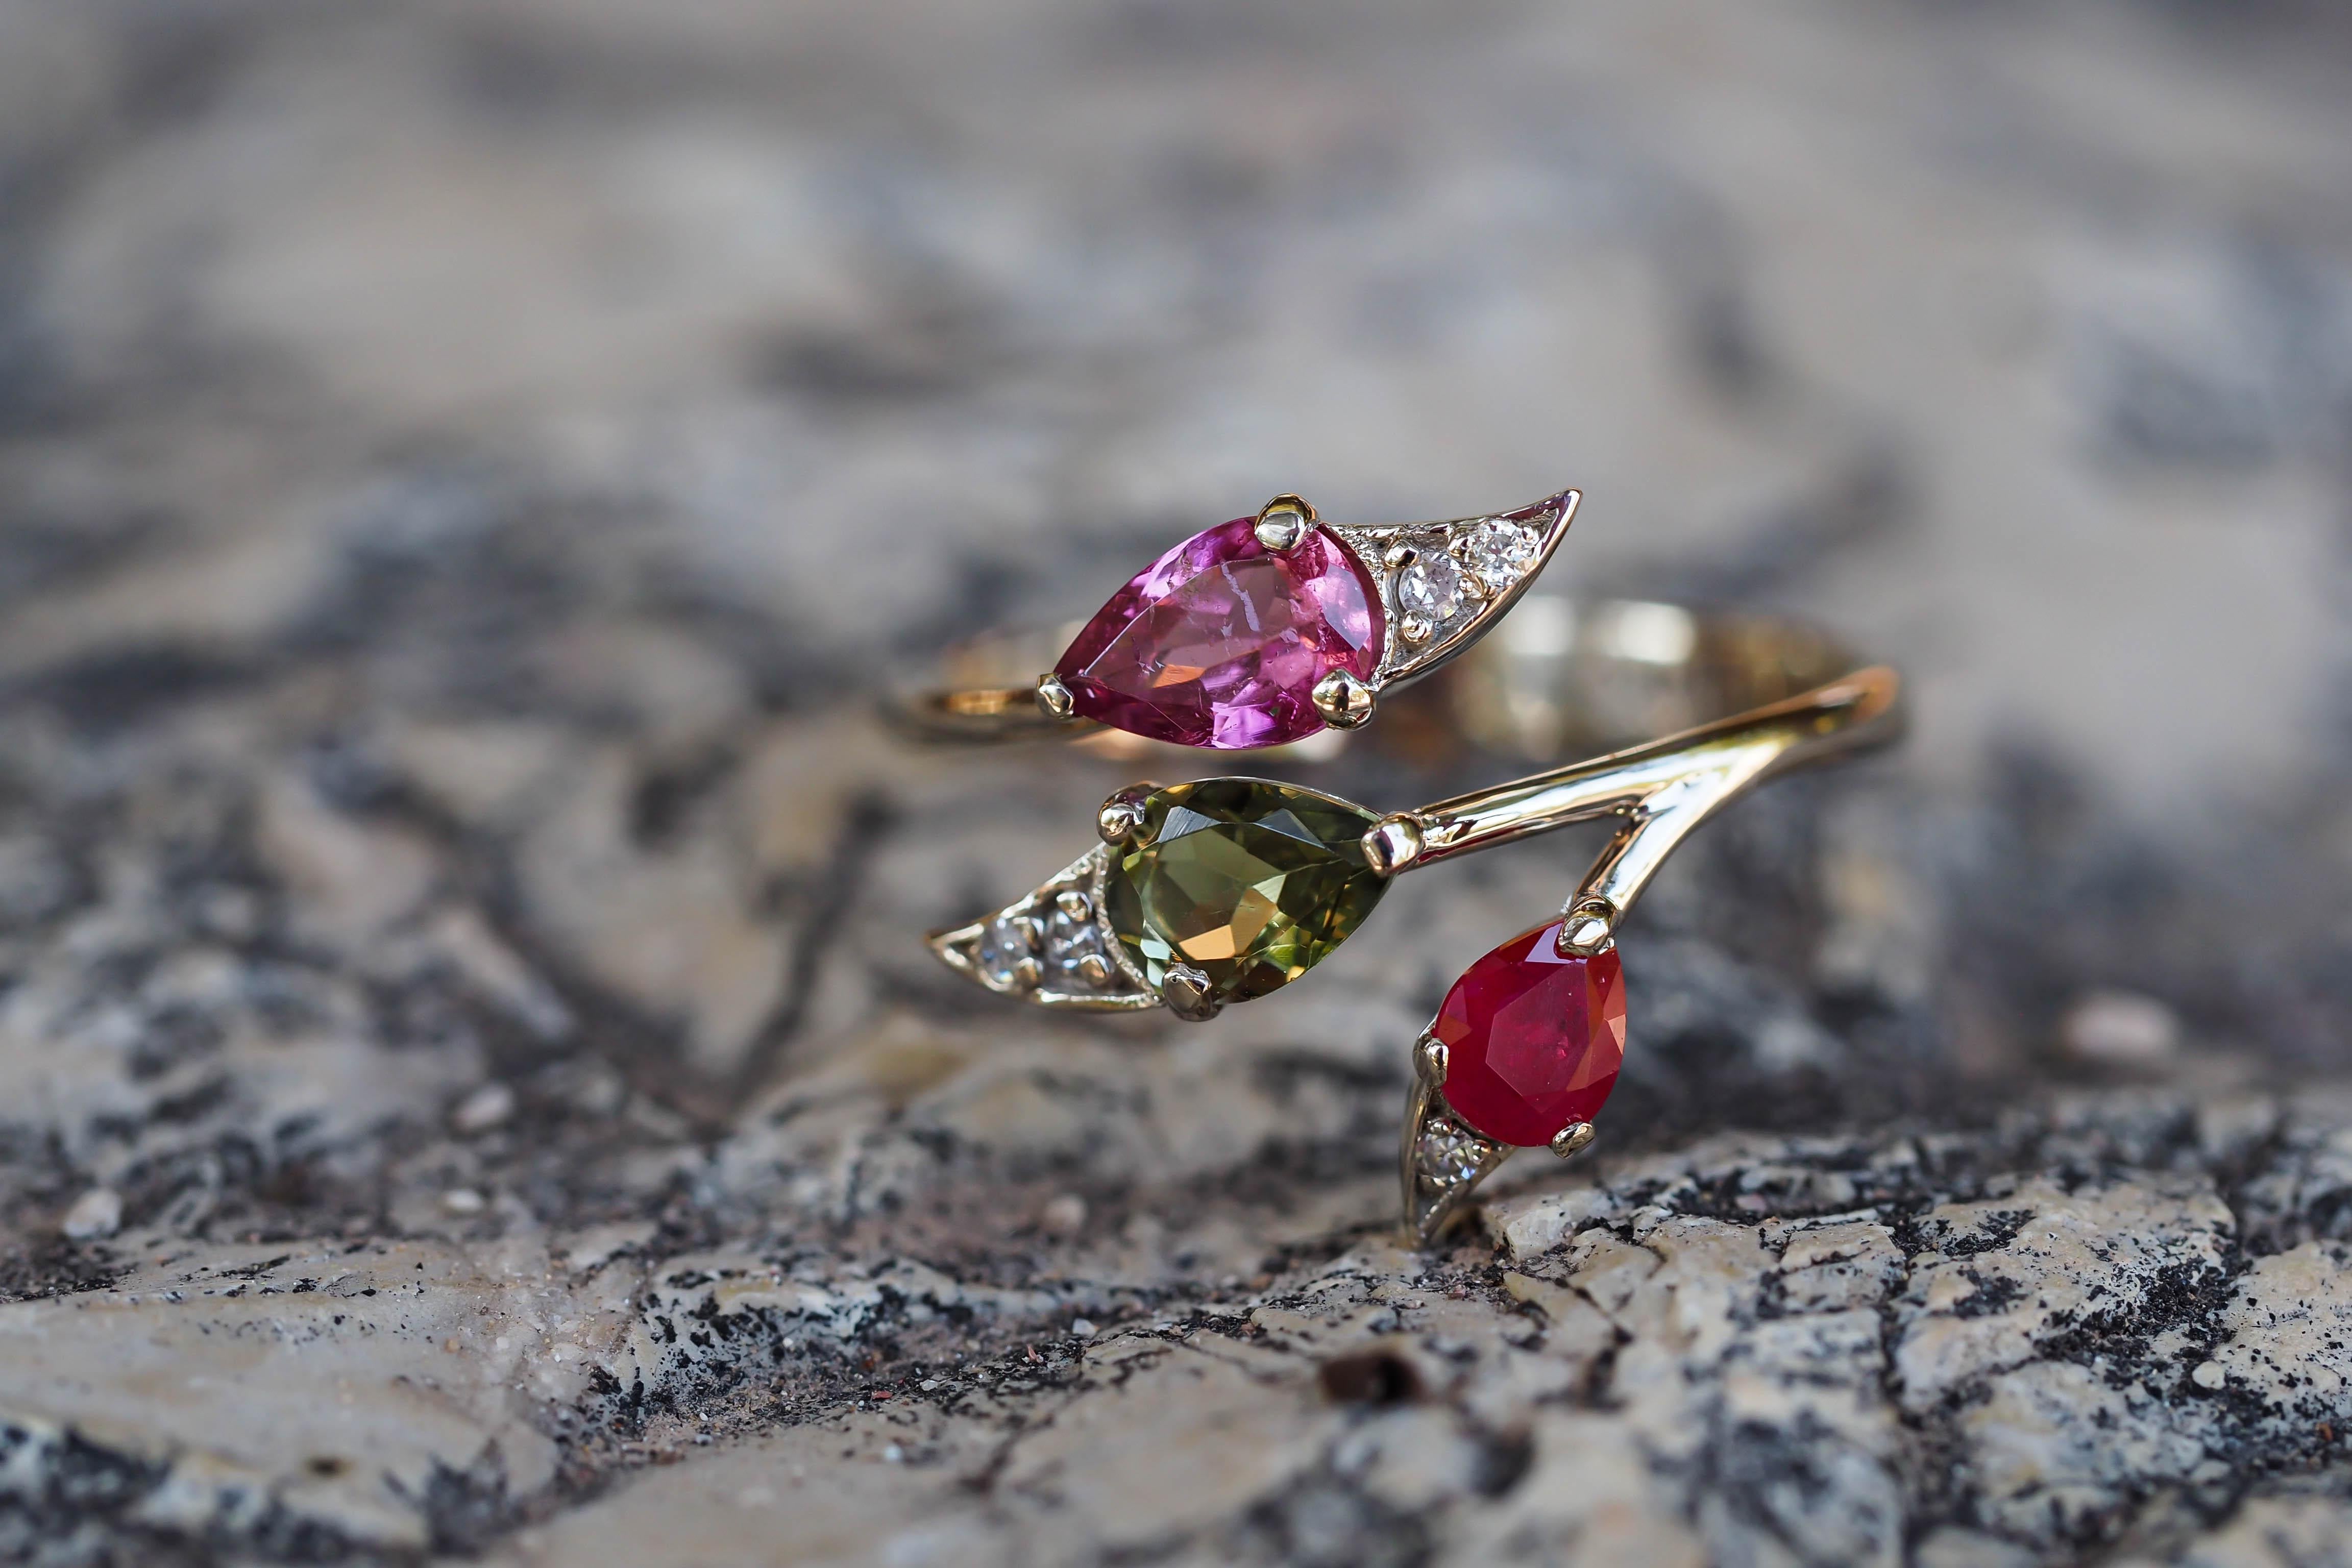 For Sale:  3 gemstone ring. Tourmalines and ruby gold ring. Multicolor gemstones ring. 14